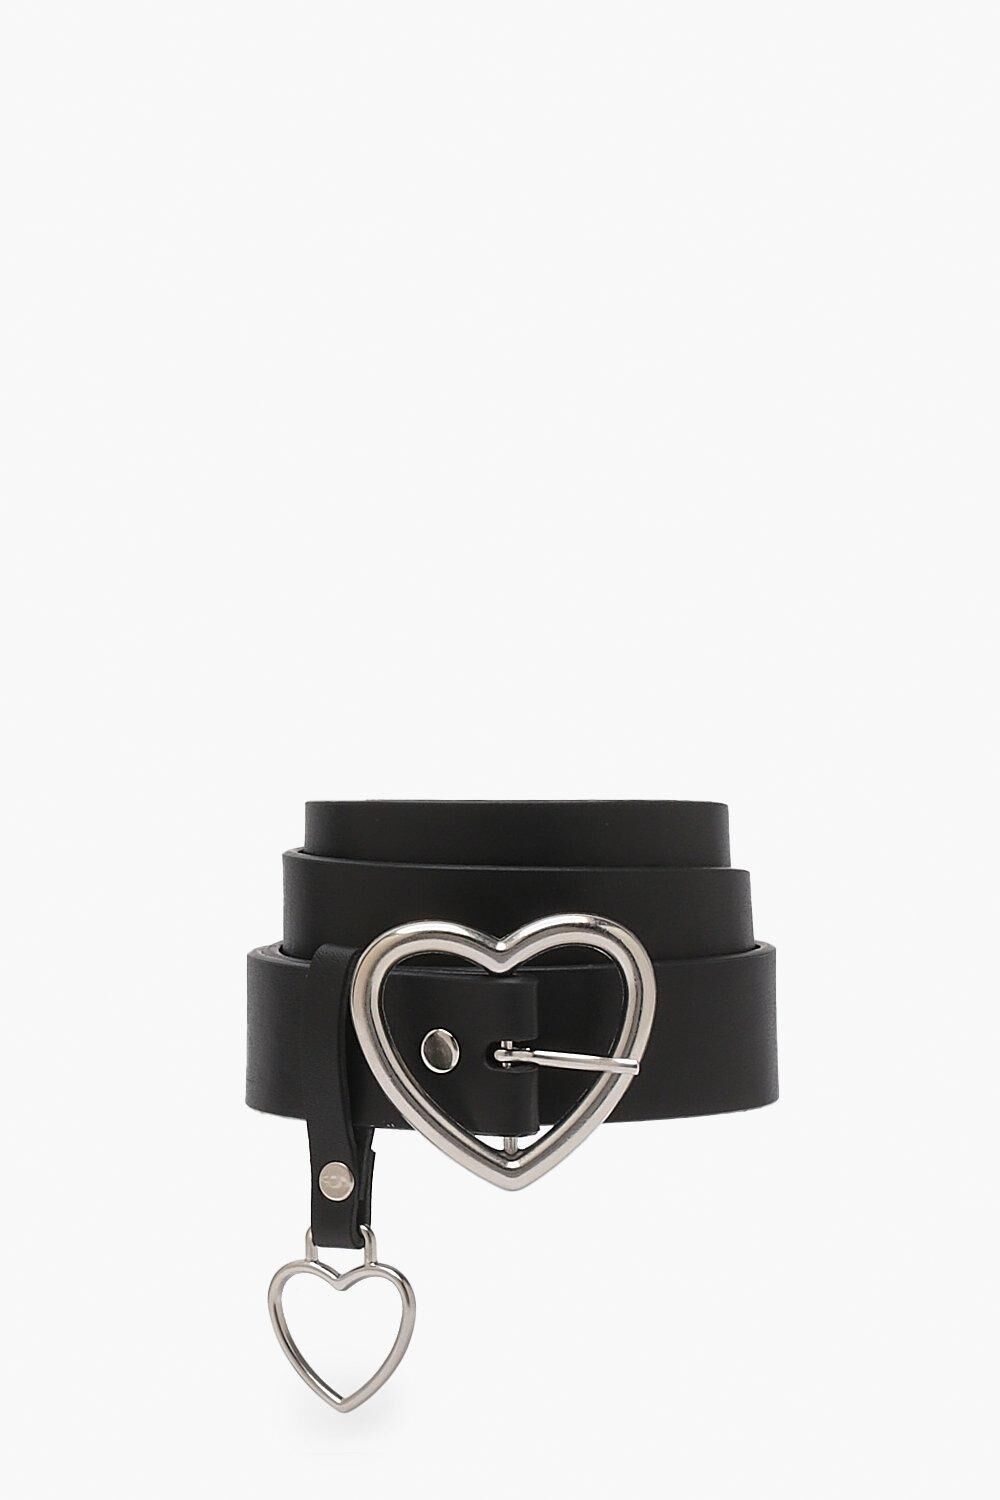 Boohoo Heart Buckle And Charm Detail Belt- Black  - Size: ONE SIZE